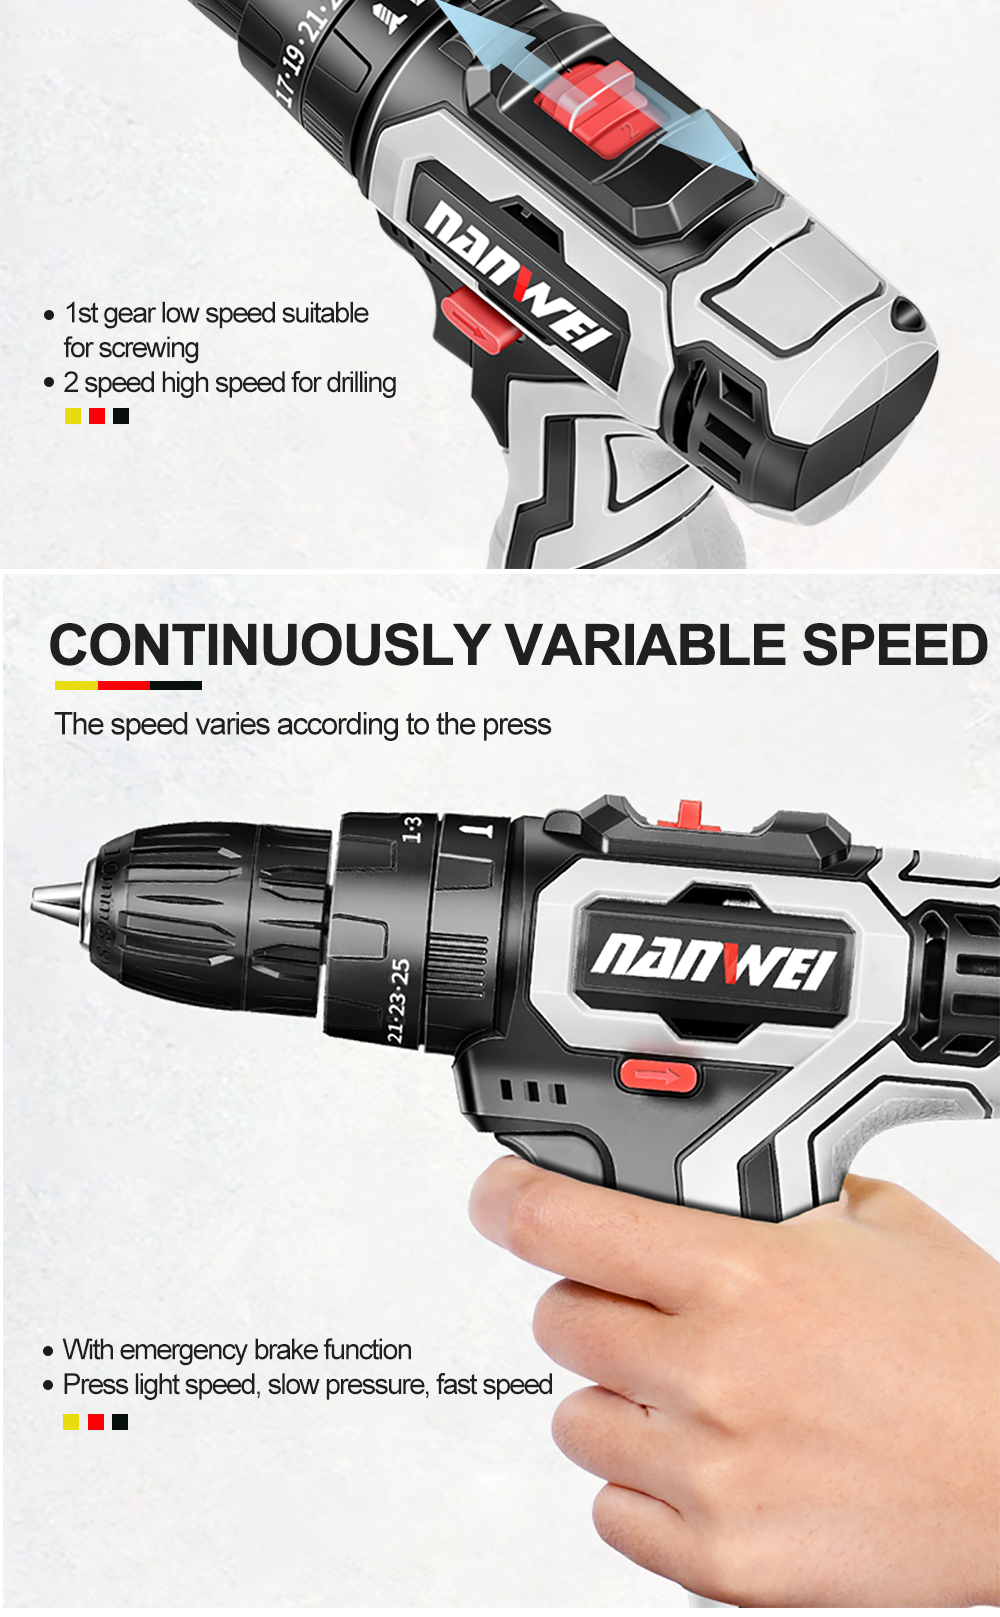 Nanwei-21V-Brushless-Impact-Power-Drill-35NM-Li-ion-Rechargeable-Electric-Flat-Drill-Screw-Driver-2--1695400-9